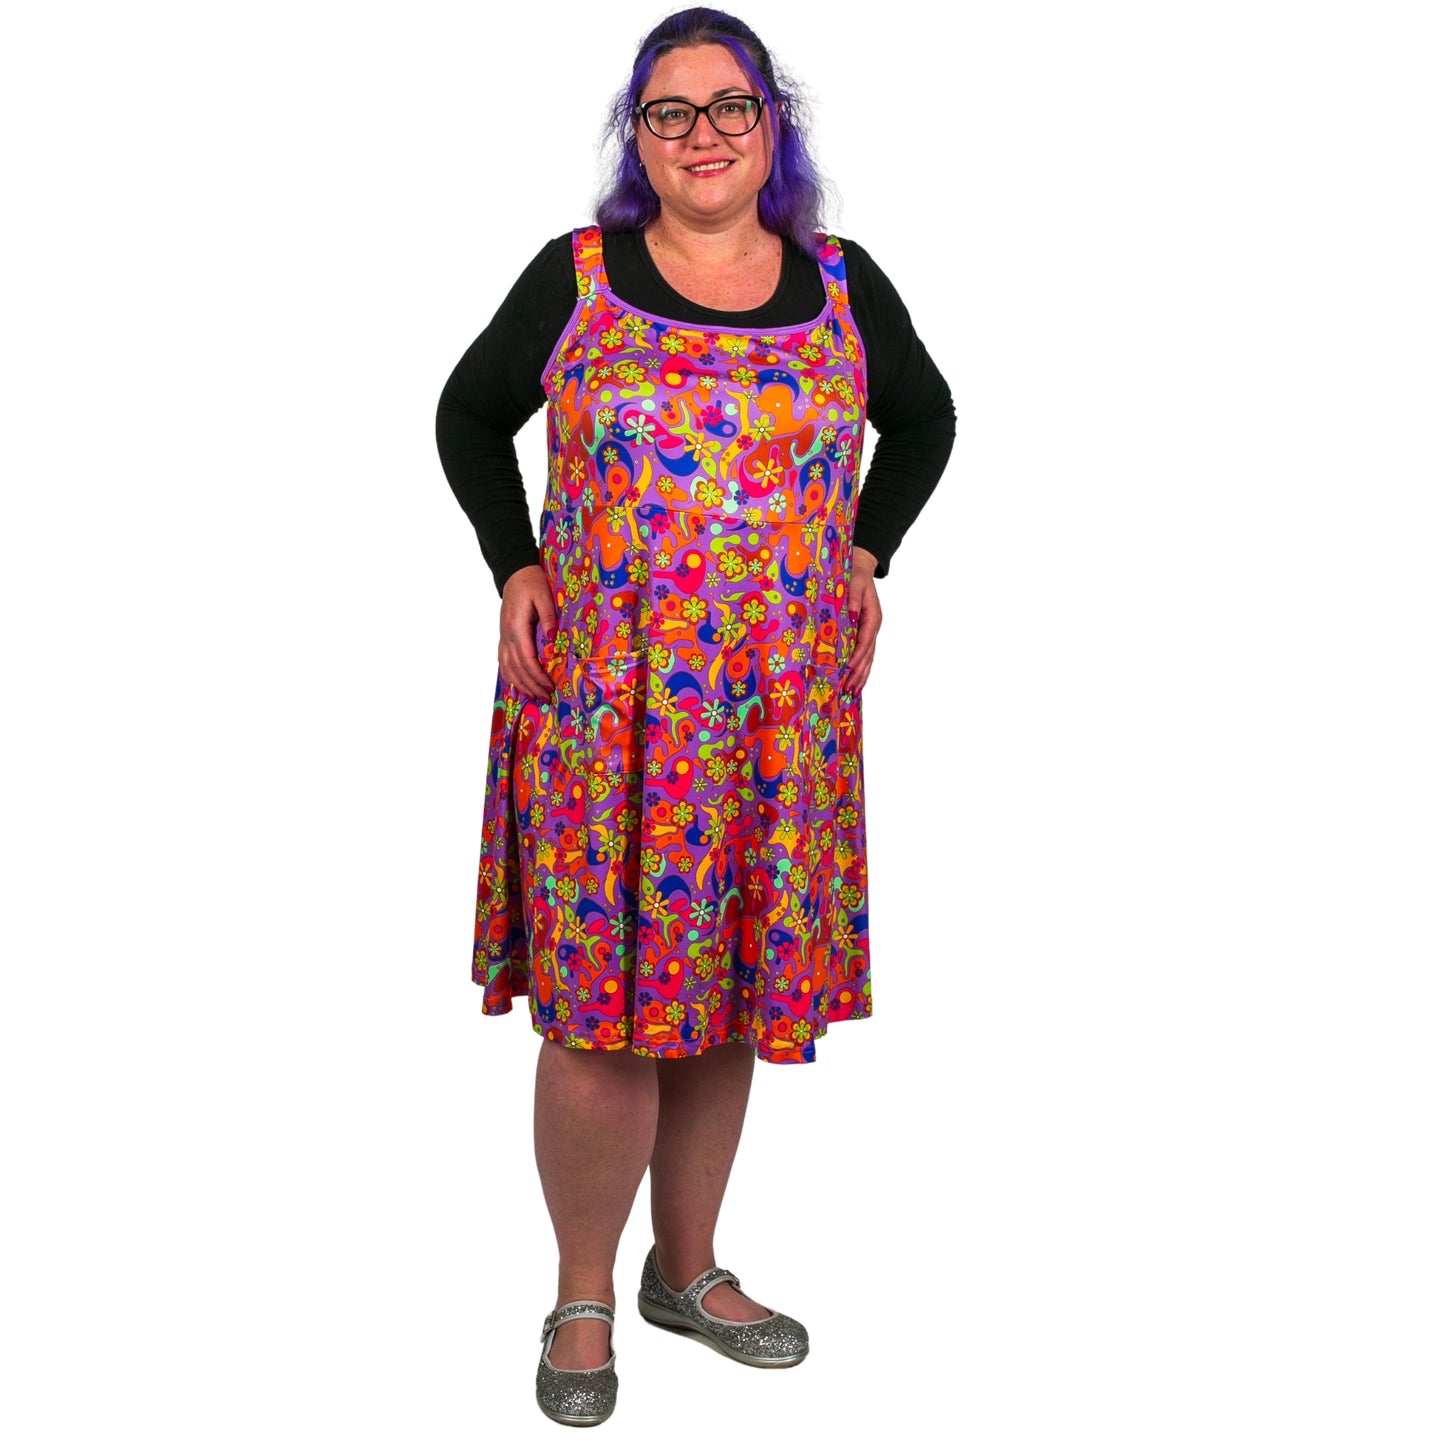 Flower Power Pinafore by RainbowsAndFairies.com.au (Psychedelic - Woodstock - Dress With Pockets - Vintage Inspired - Kitsch) - SKU: CL_PFORE_FLOPO_ORG - Pic-01